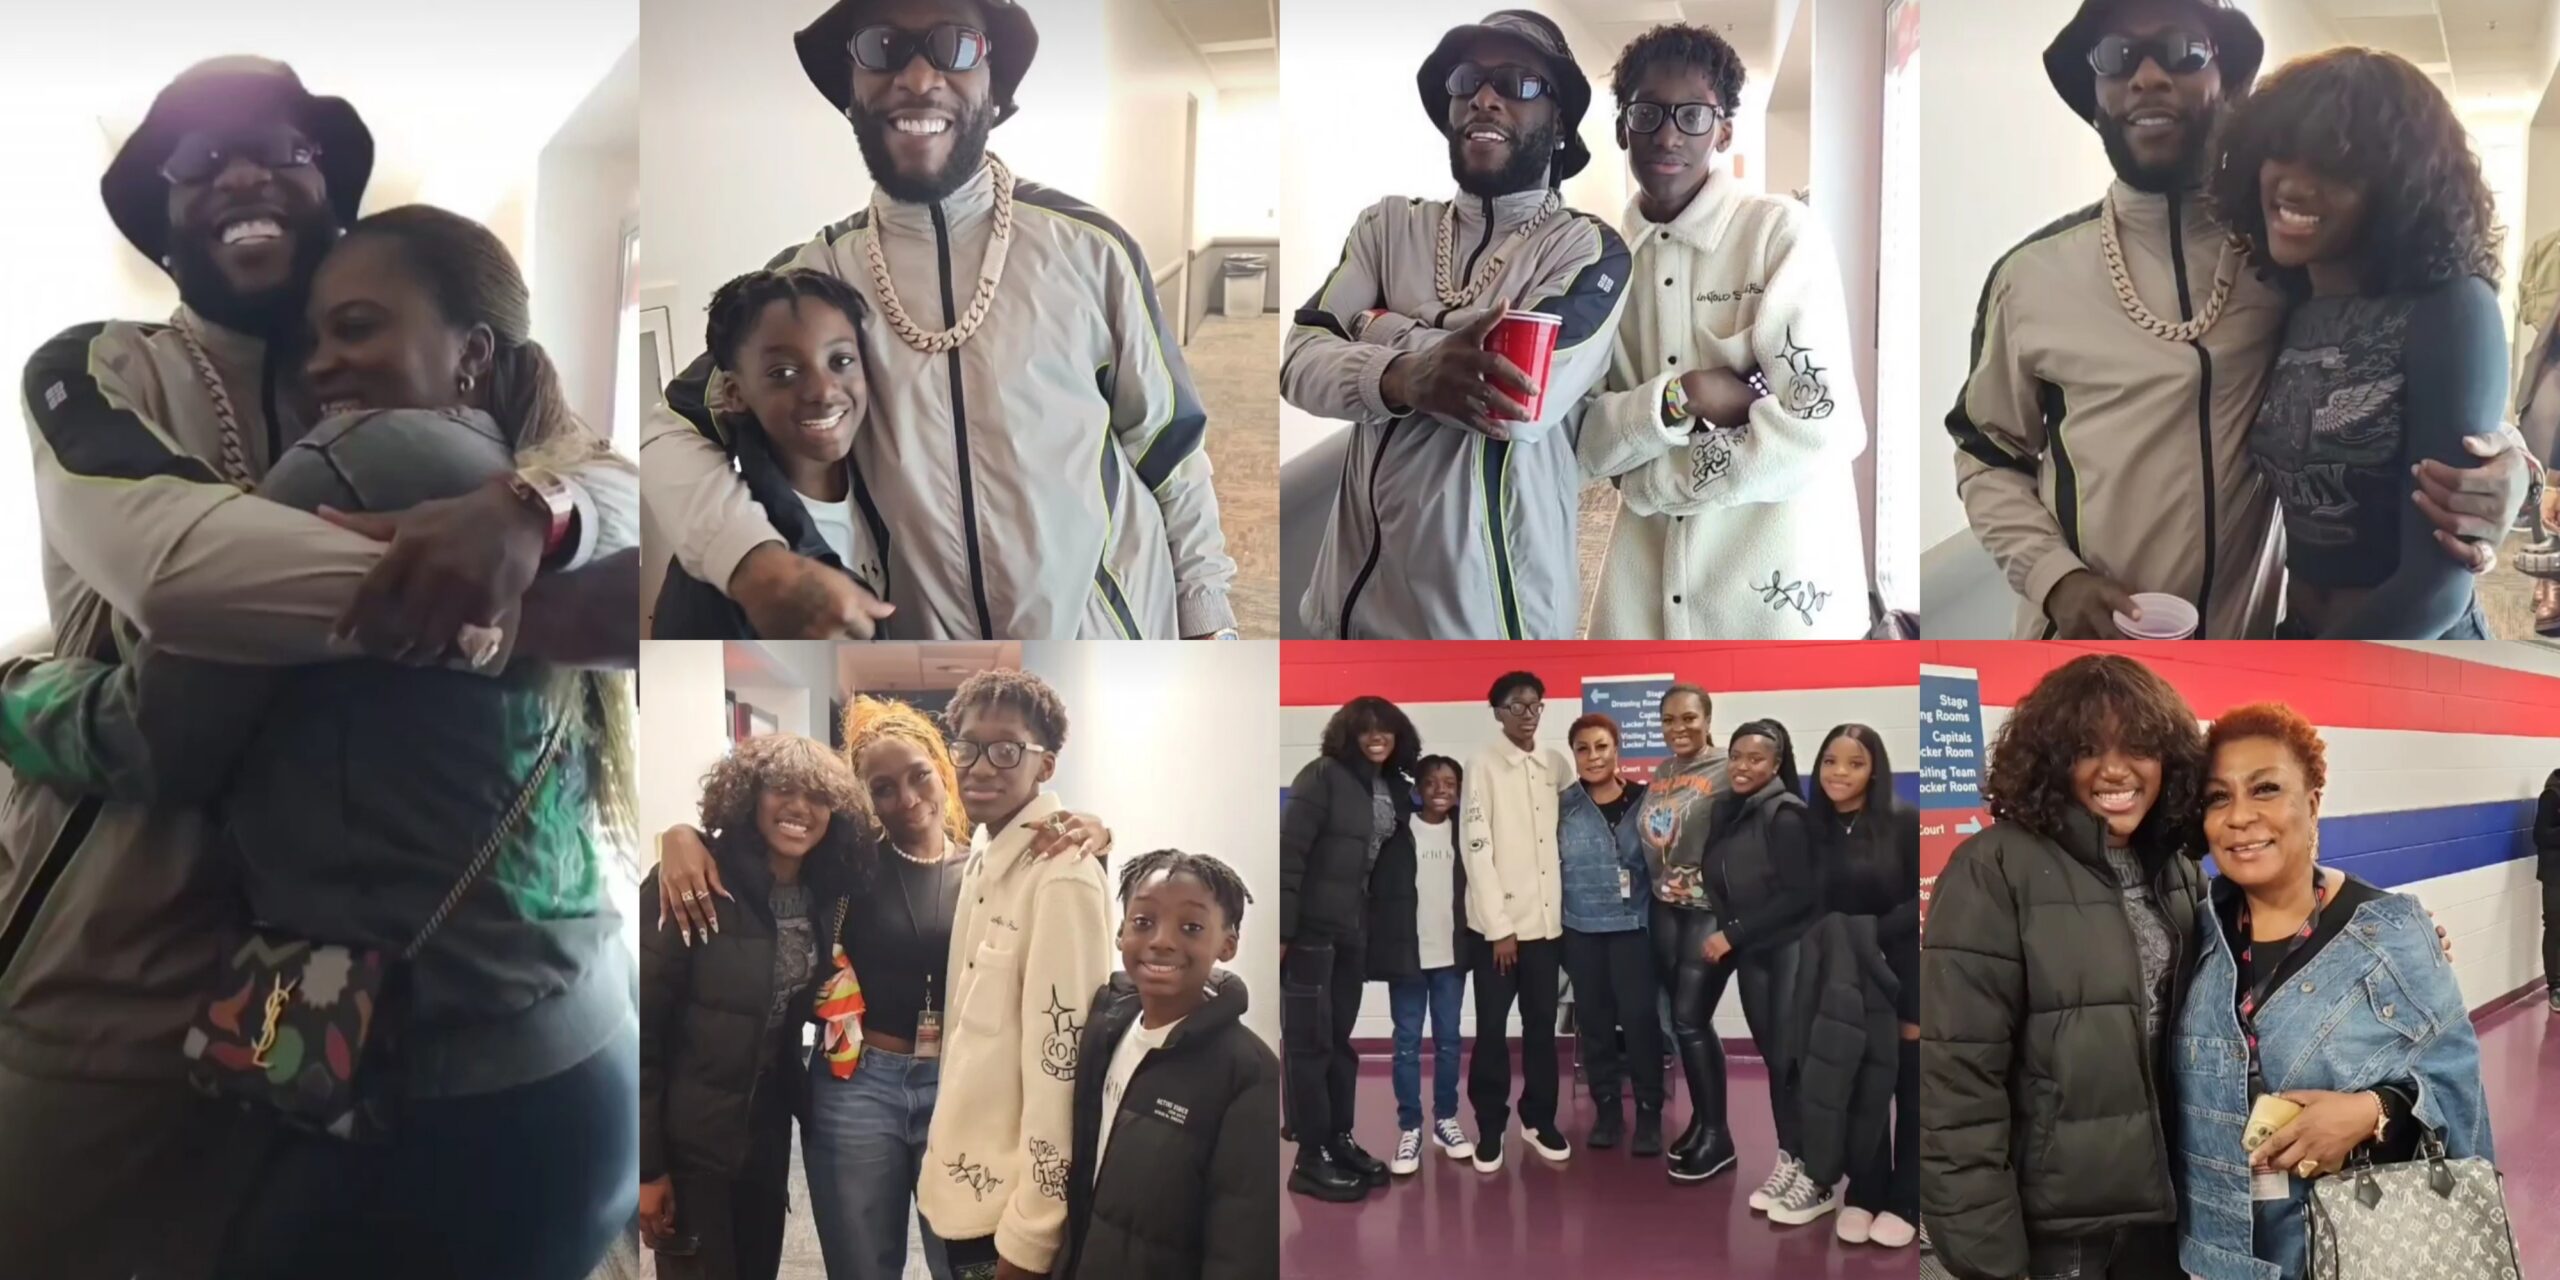 Singer 2face treats babymama, Pero Adeniyi and kids to a special night out with Burna Boy (Photos and Video)